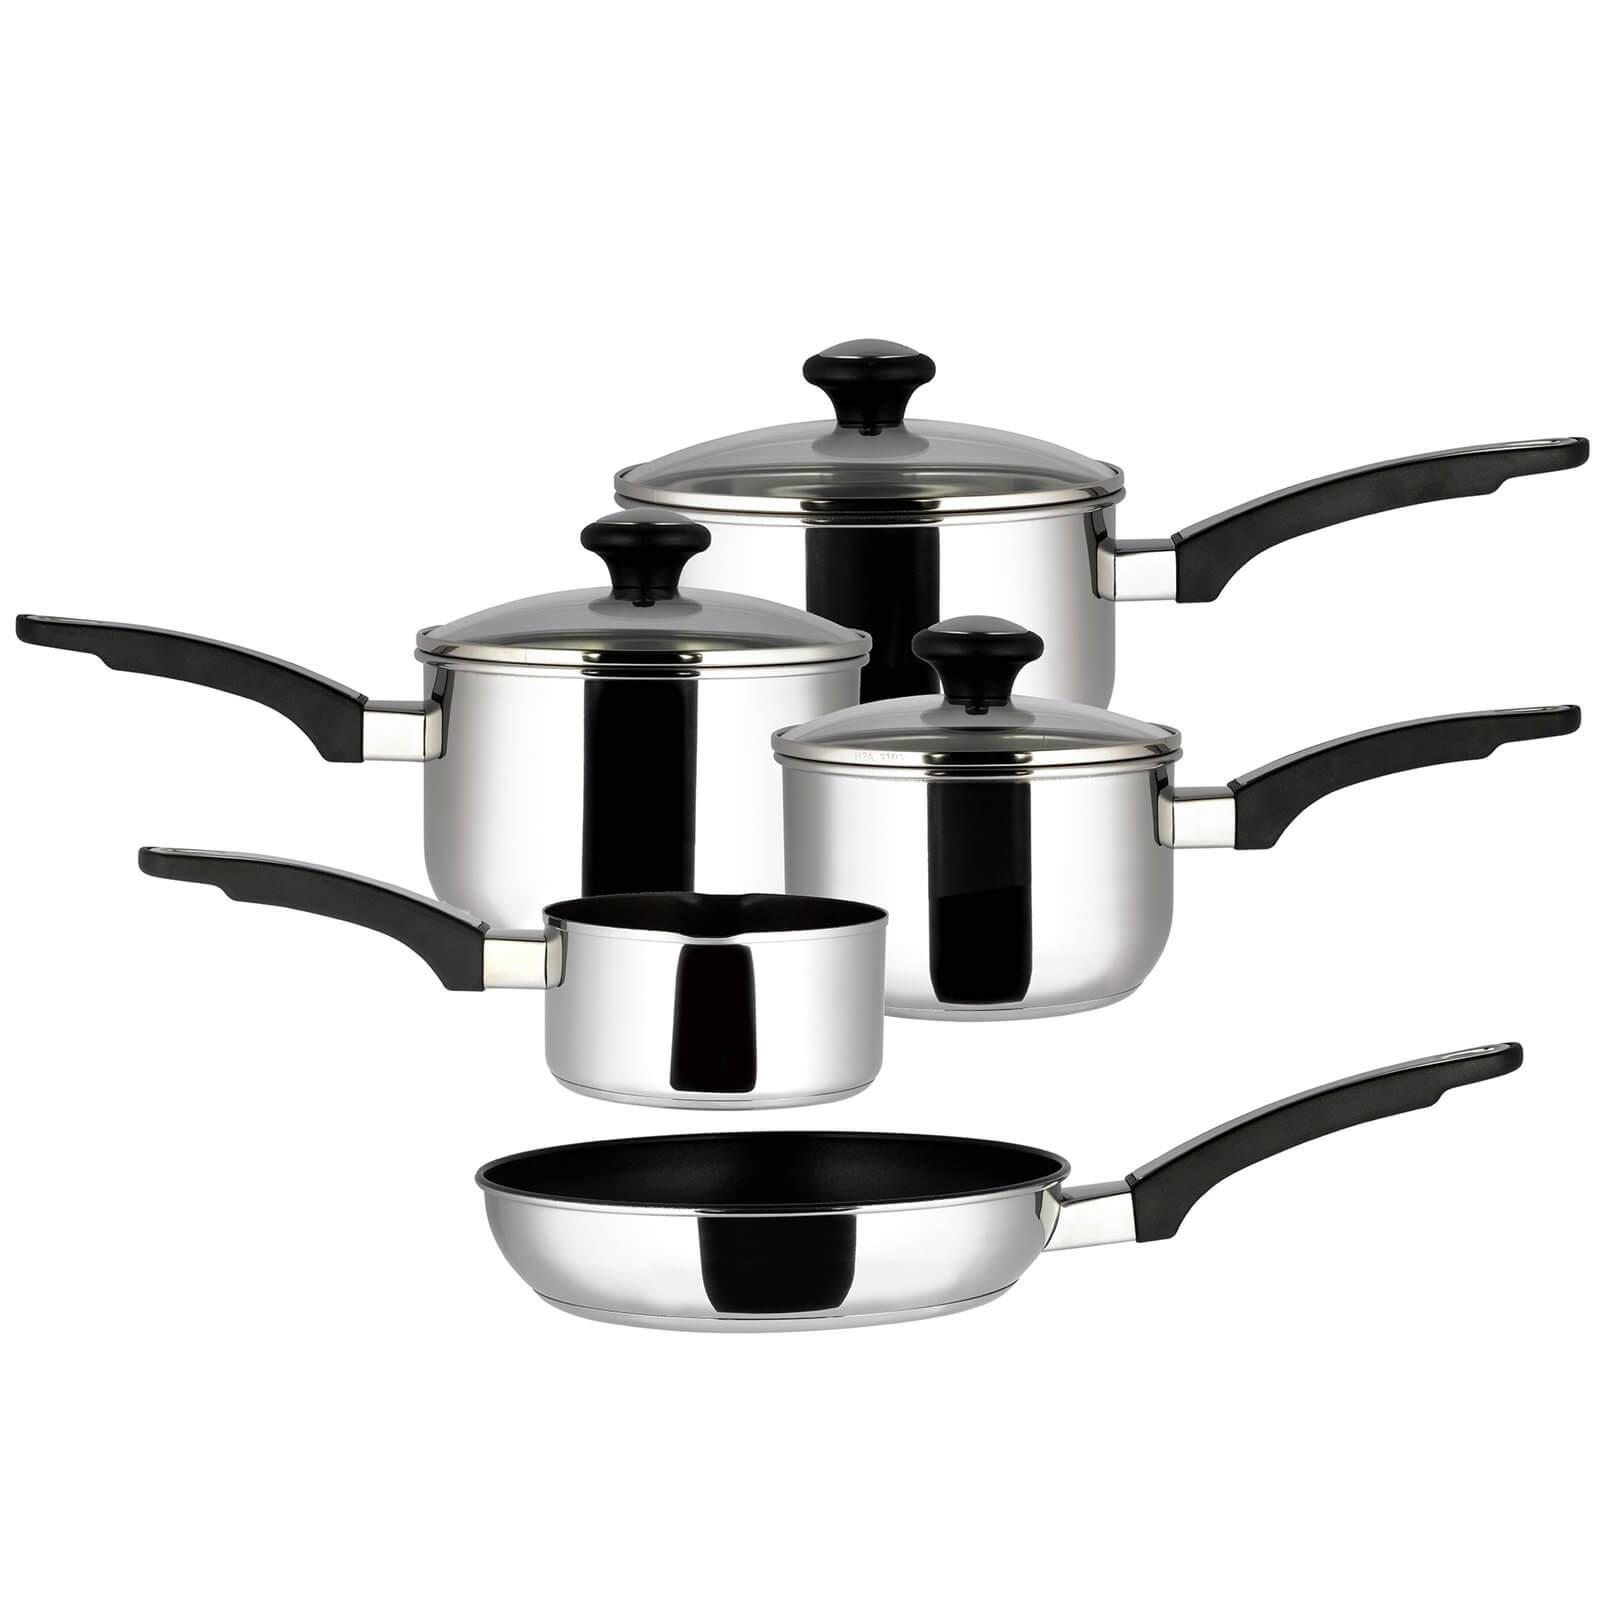 Prestige Everyday Induction Stainless Steel Cookware - Set of 5